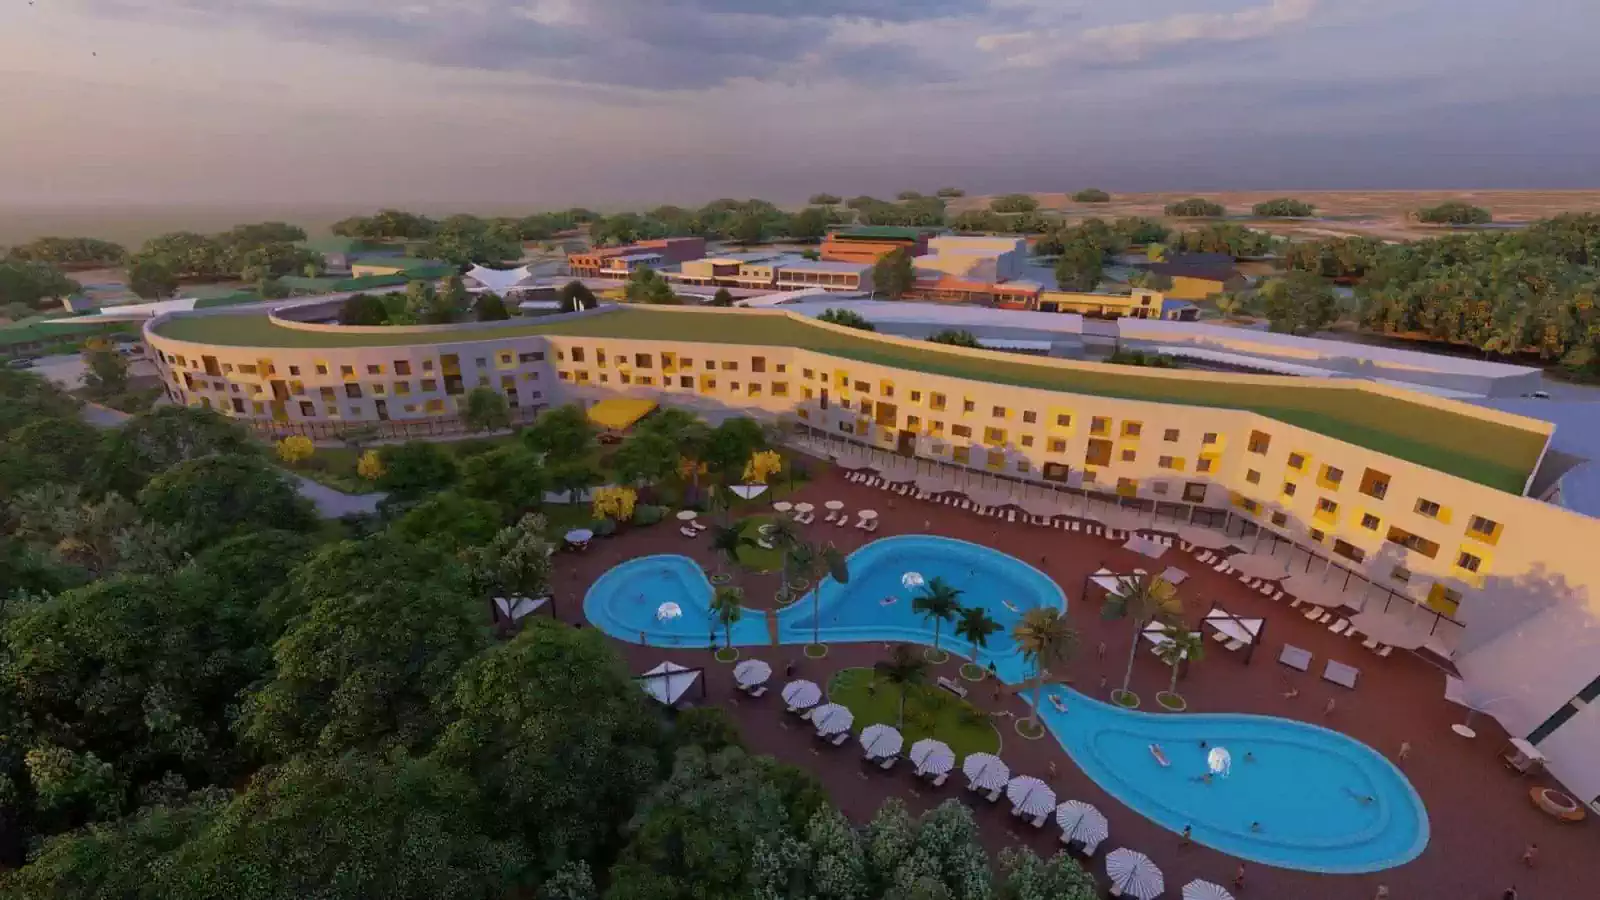 200 room luxury hotel with green roof and sprawling pool deck within vegetation